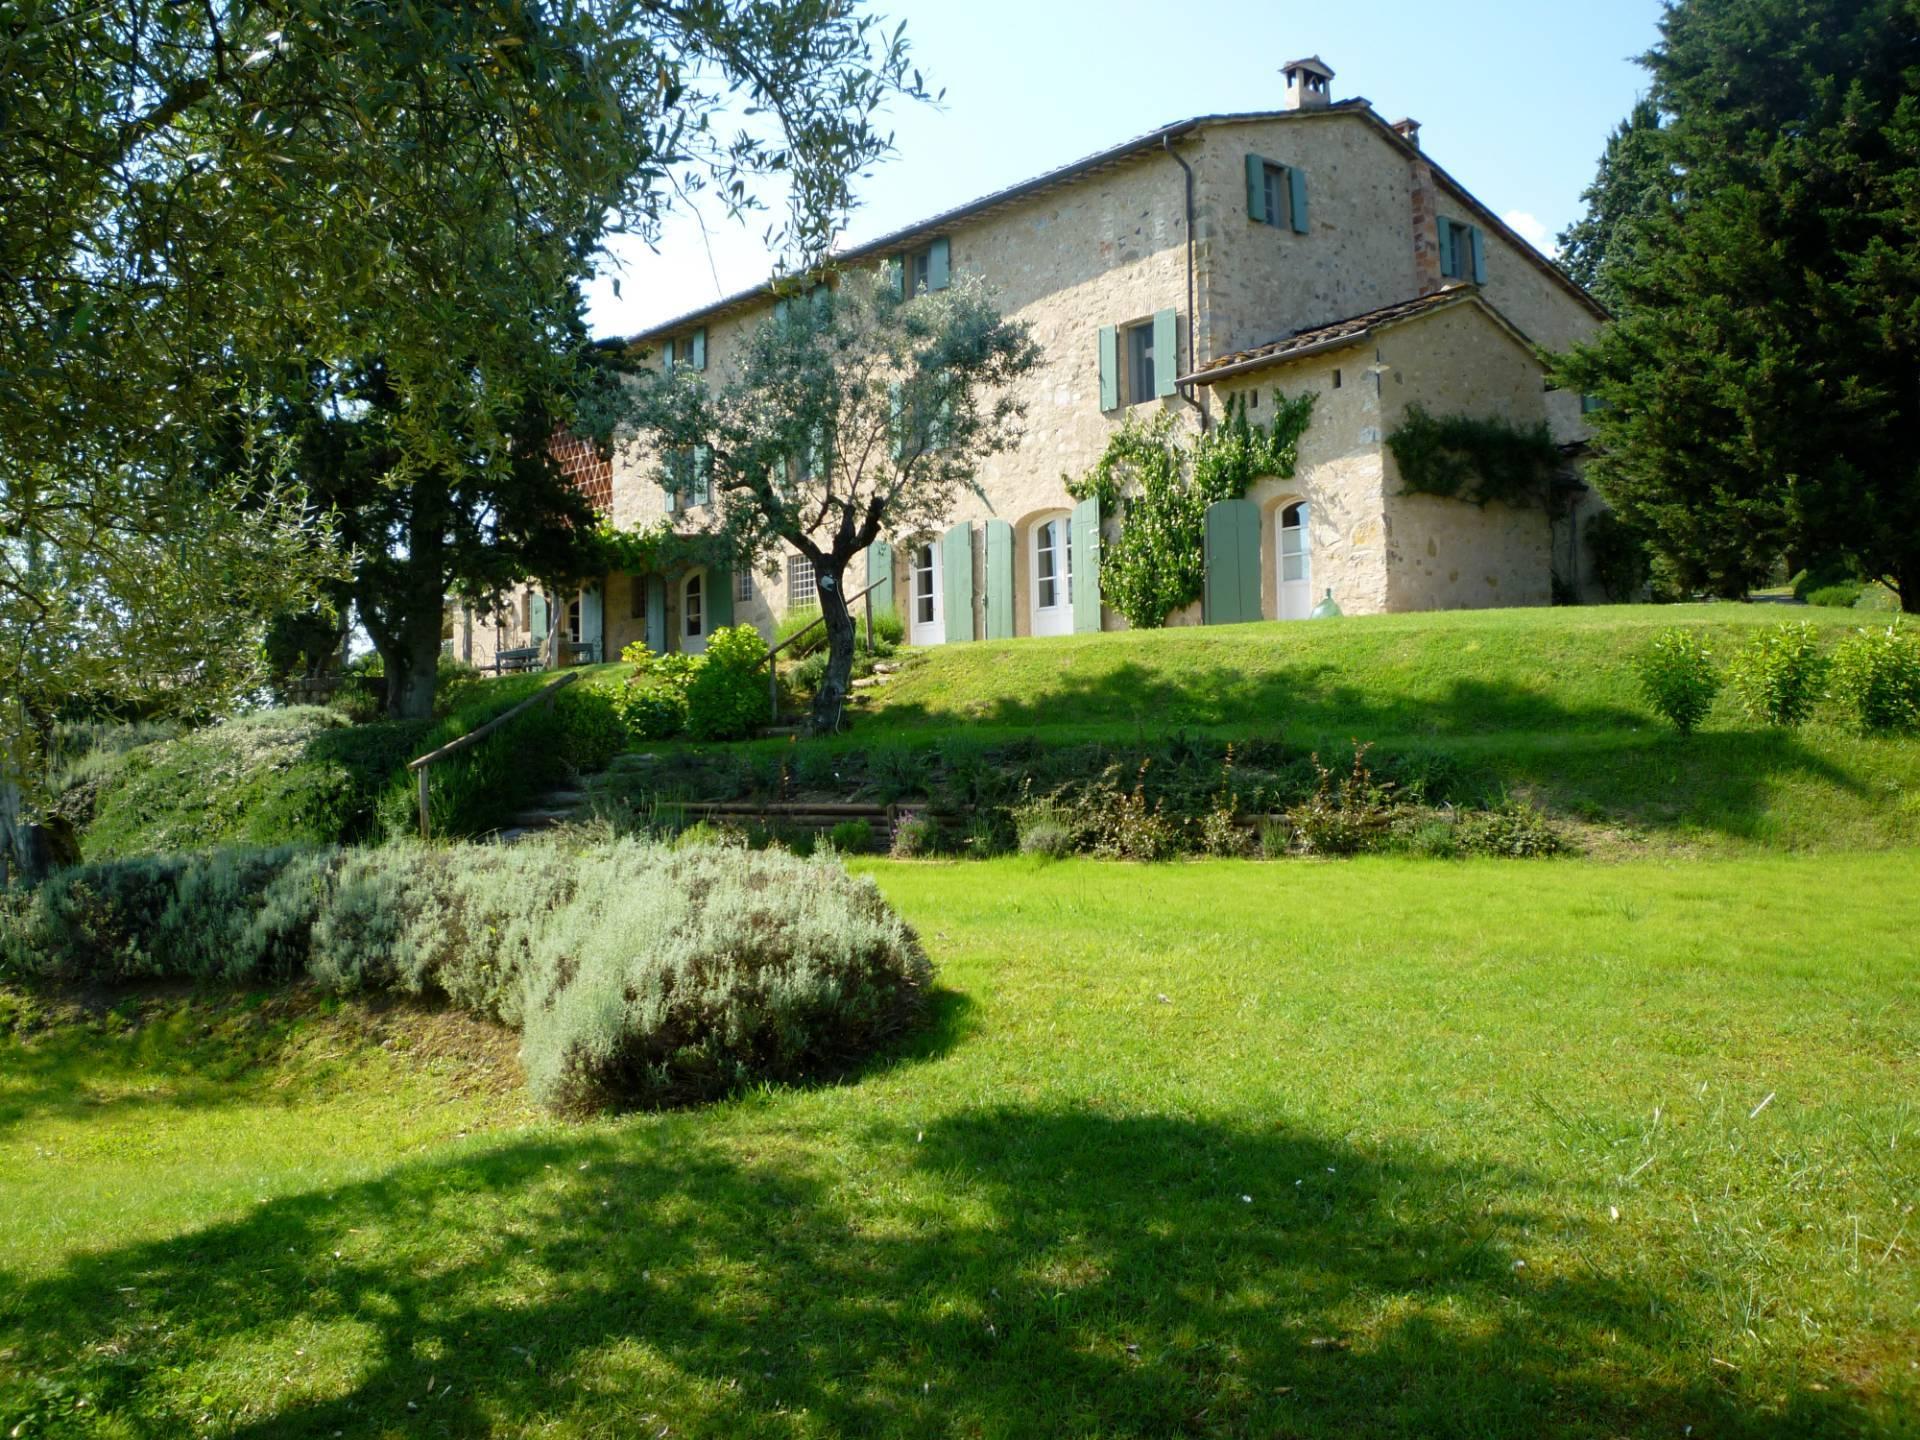 A luxurious farmhouse in the Tuscan countryside - 1